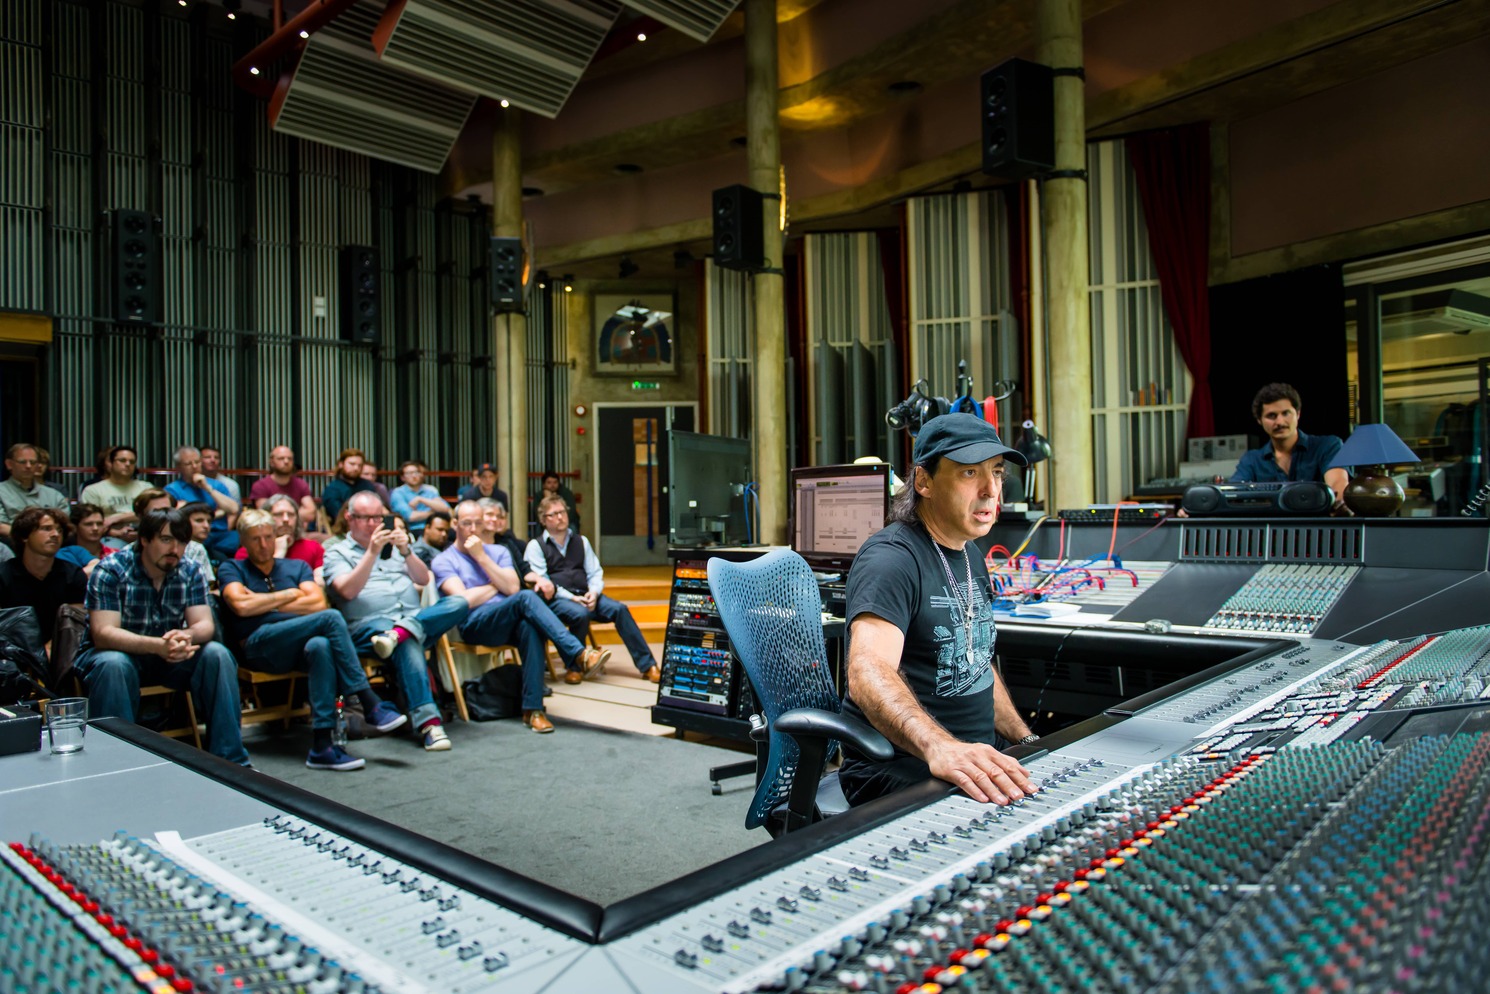 Chris Lord Alge at the controls of the SSL in the Big Room